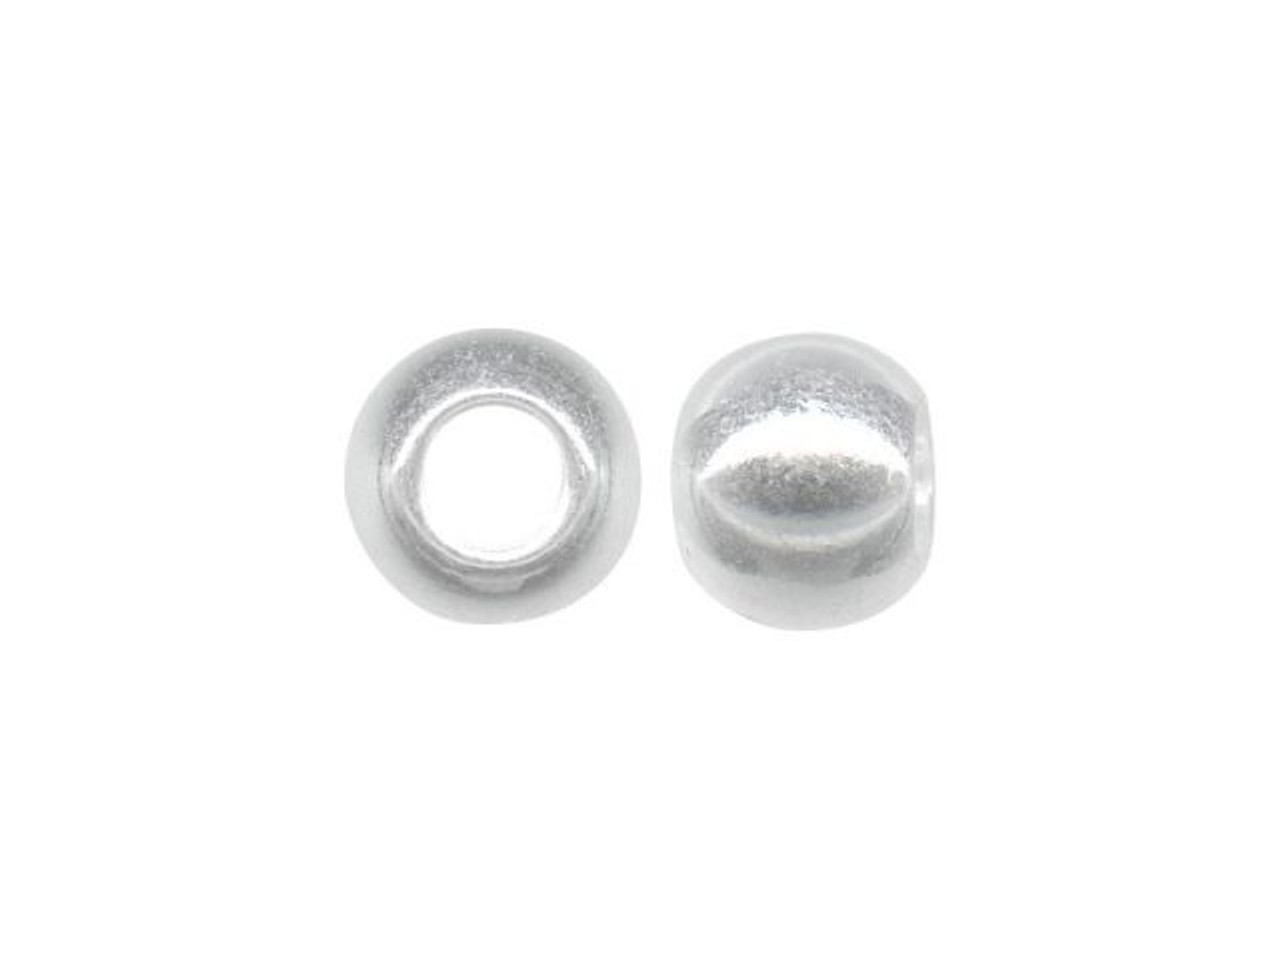 TierraCast Antique Silver 8mm Large Hole Spacer